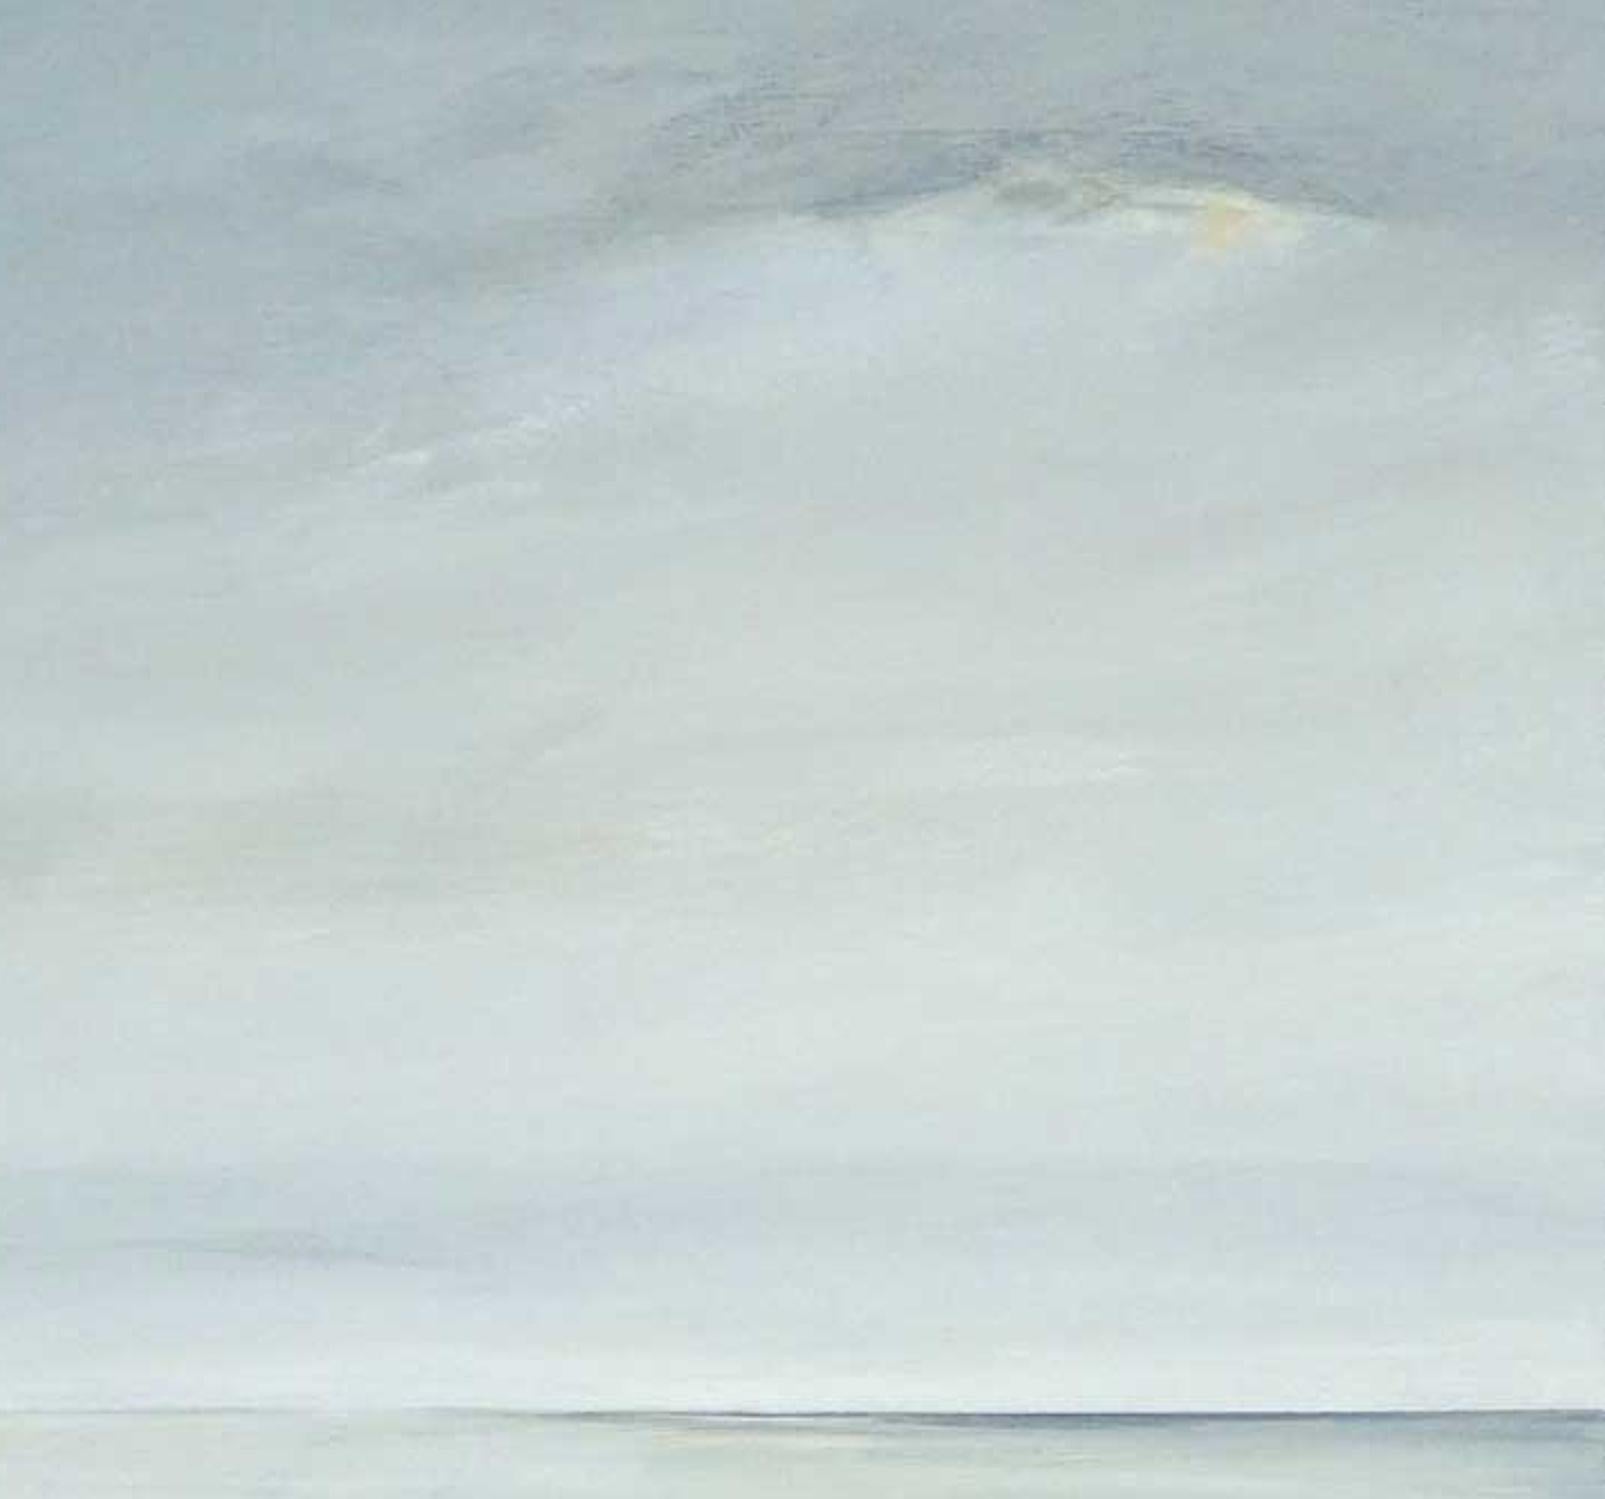 Sunlit Moment - Brooding British Seascape: Acrylic on Board - Contemporary Painting by Leila Godden UA